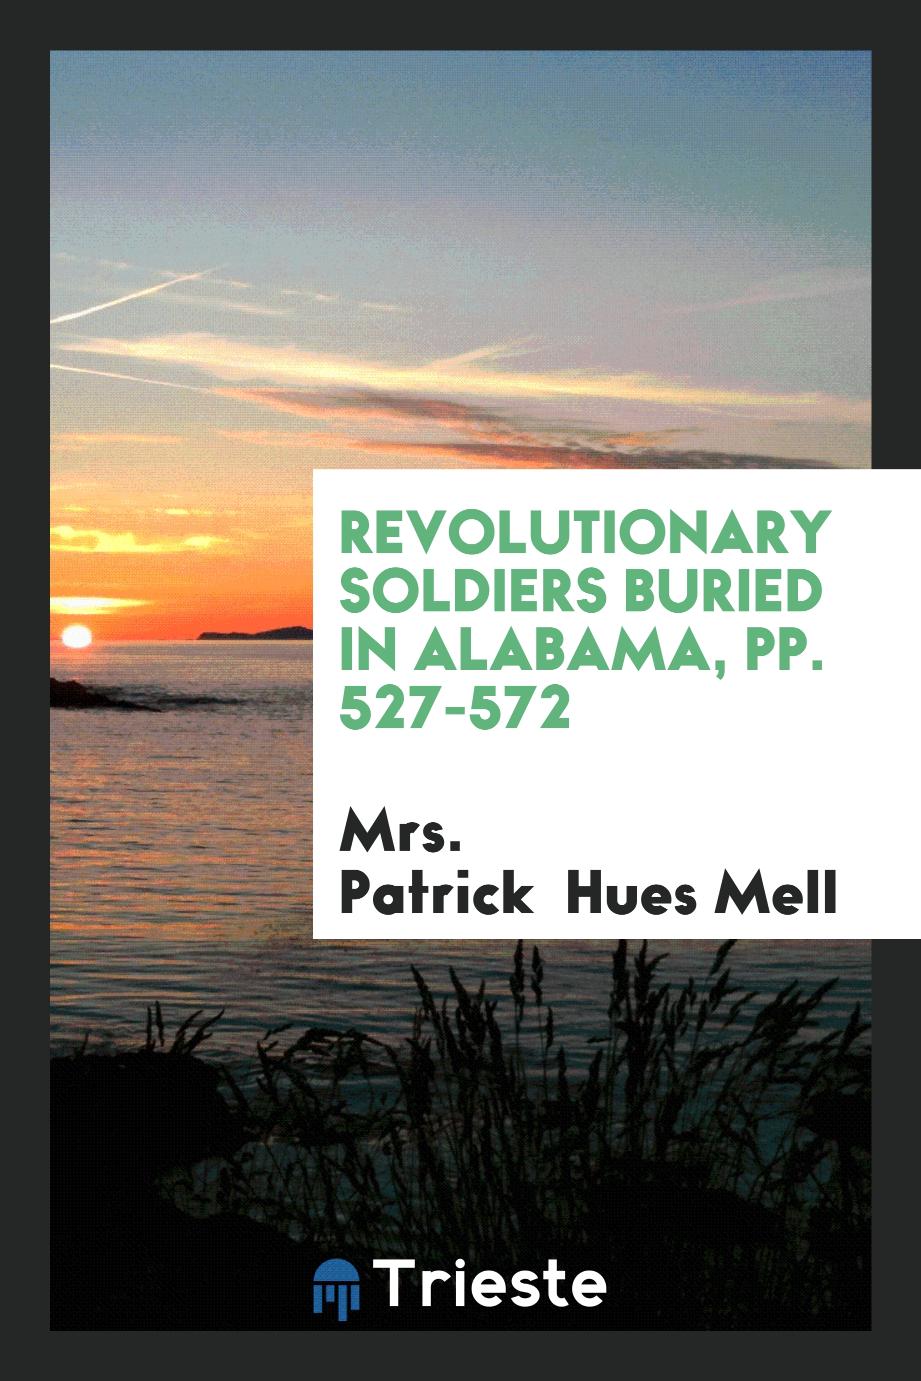 Revolutionary soldiers buried in Alabama, pp. 527-572